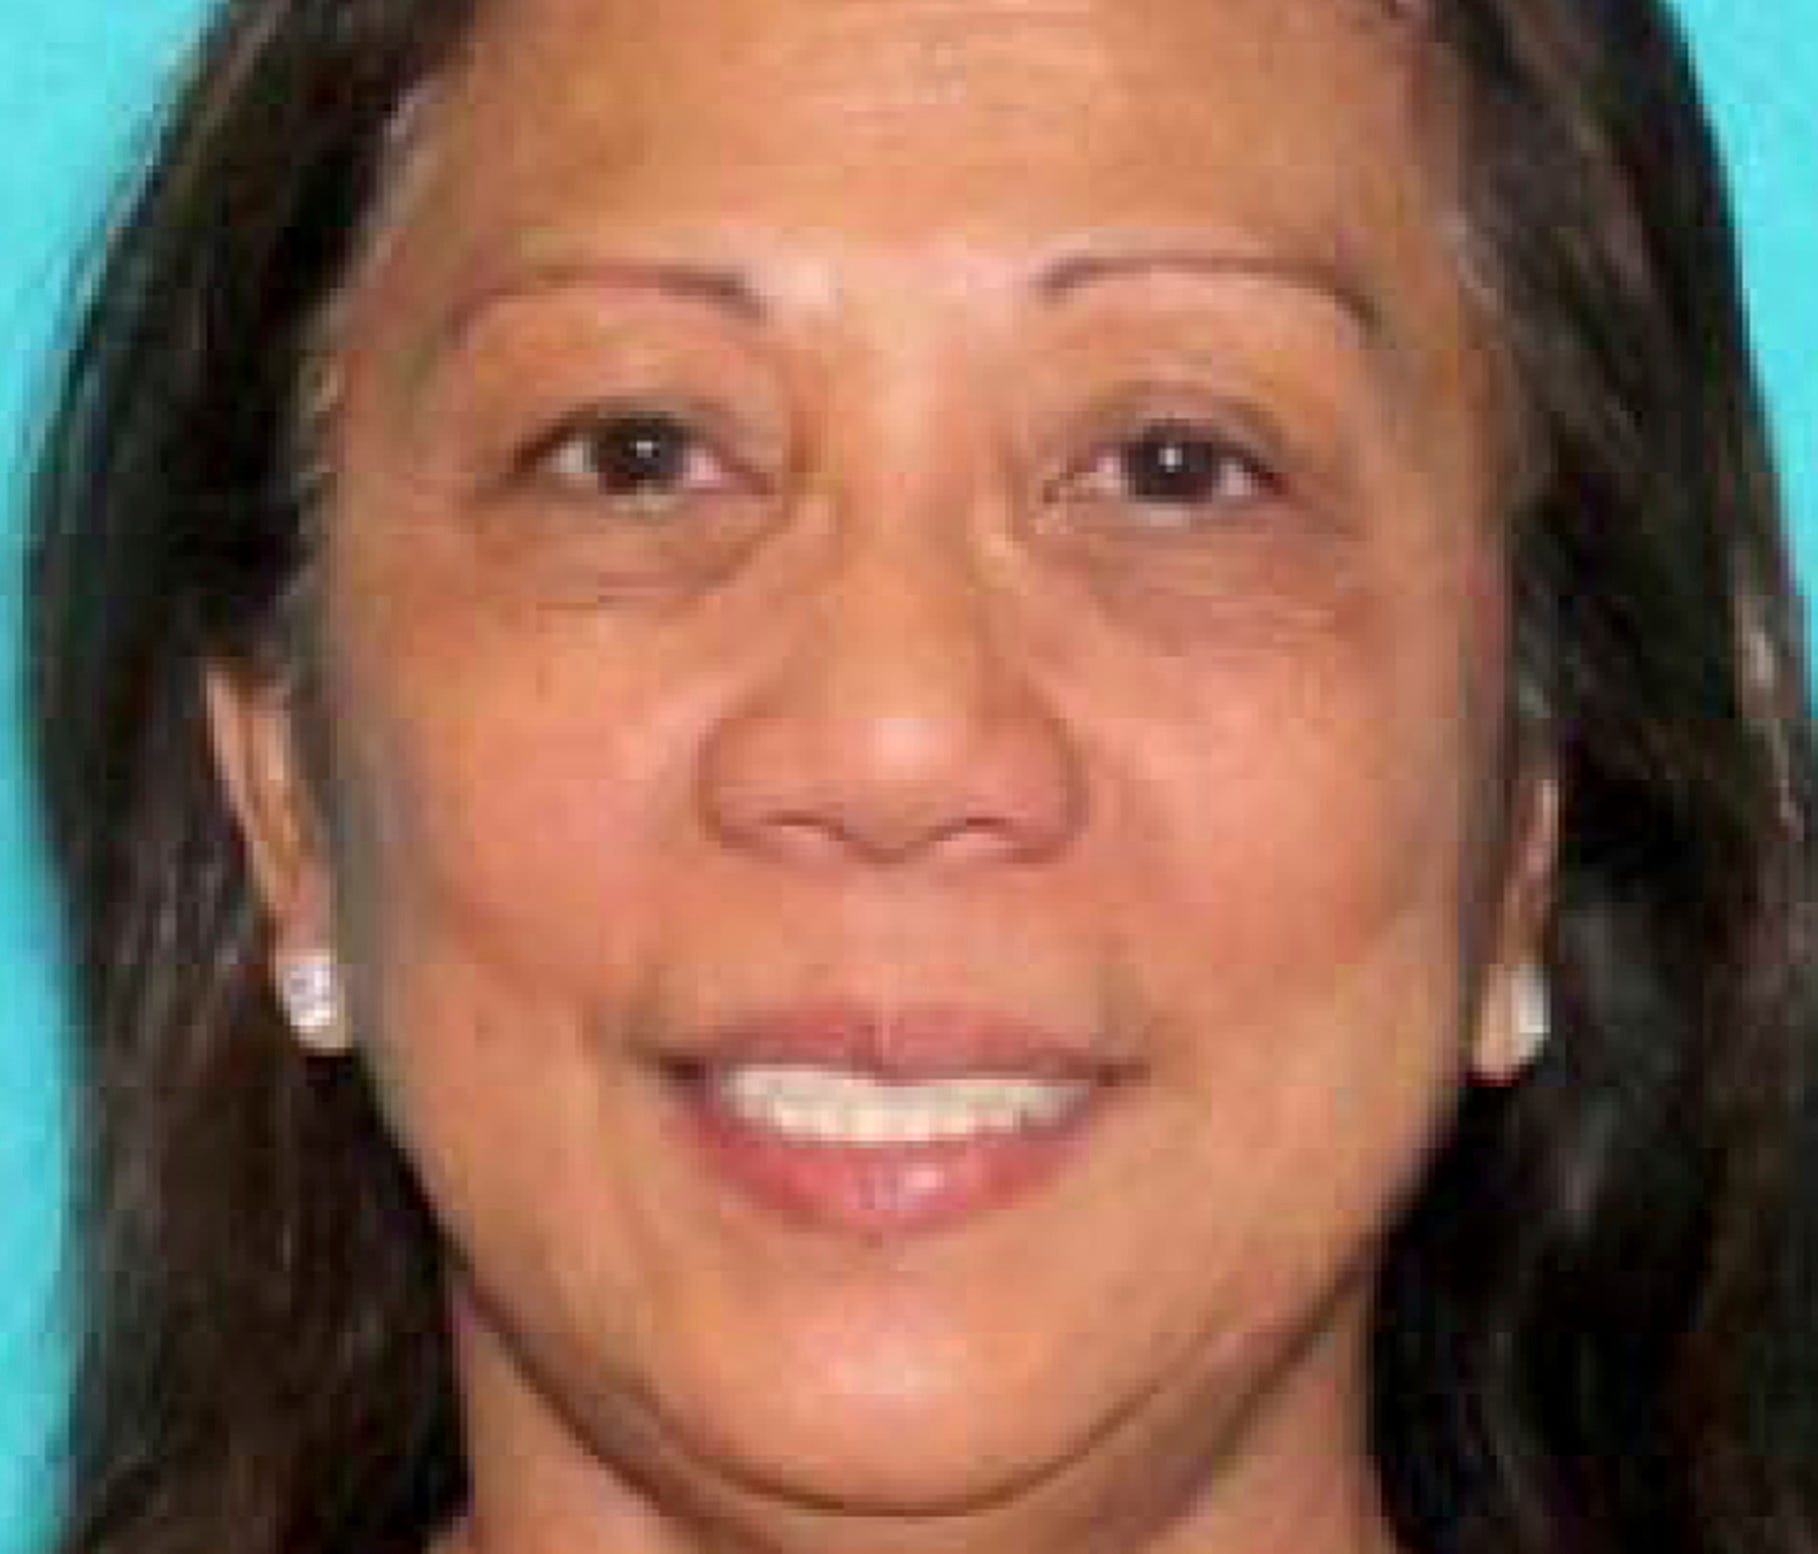 This undated photo provided by the Las Vegas Metropolitan Police Department shows Marilou Danley. Danley, 62, returned to the United States from the Philippines on Tuesday night, Oct. 3, 2017.